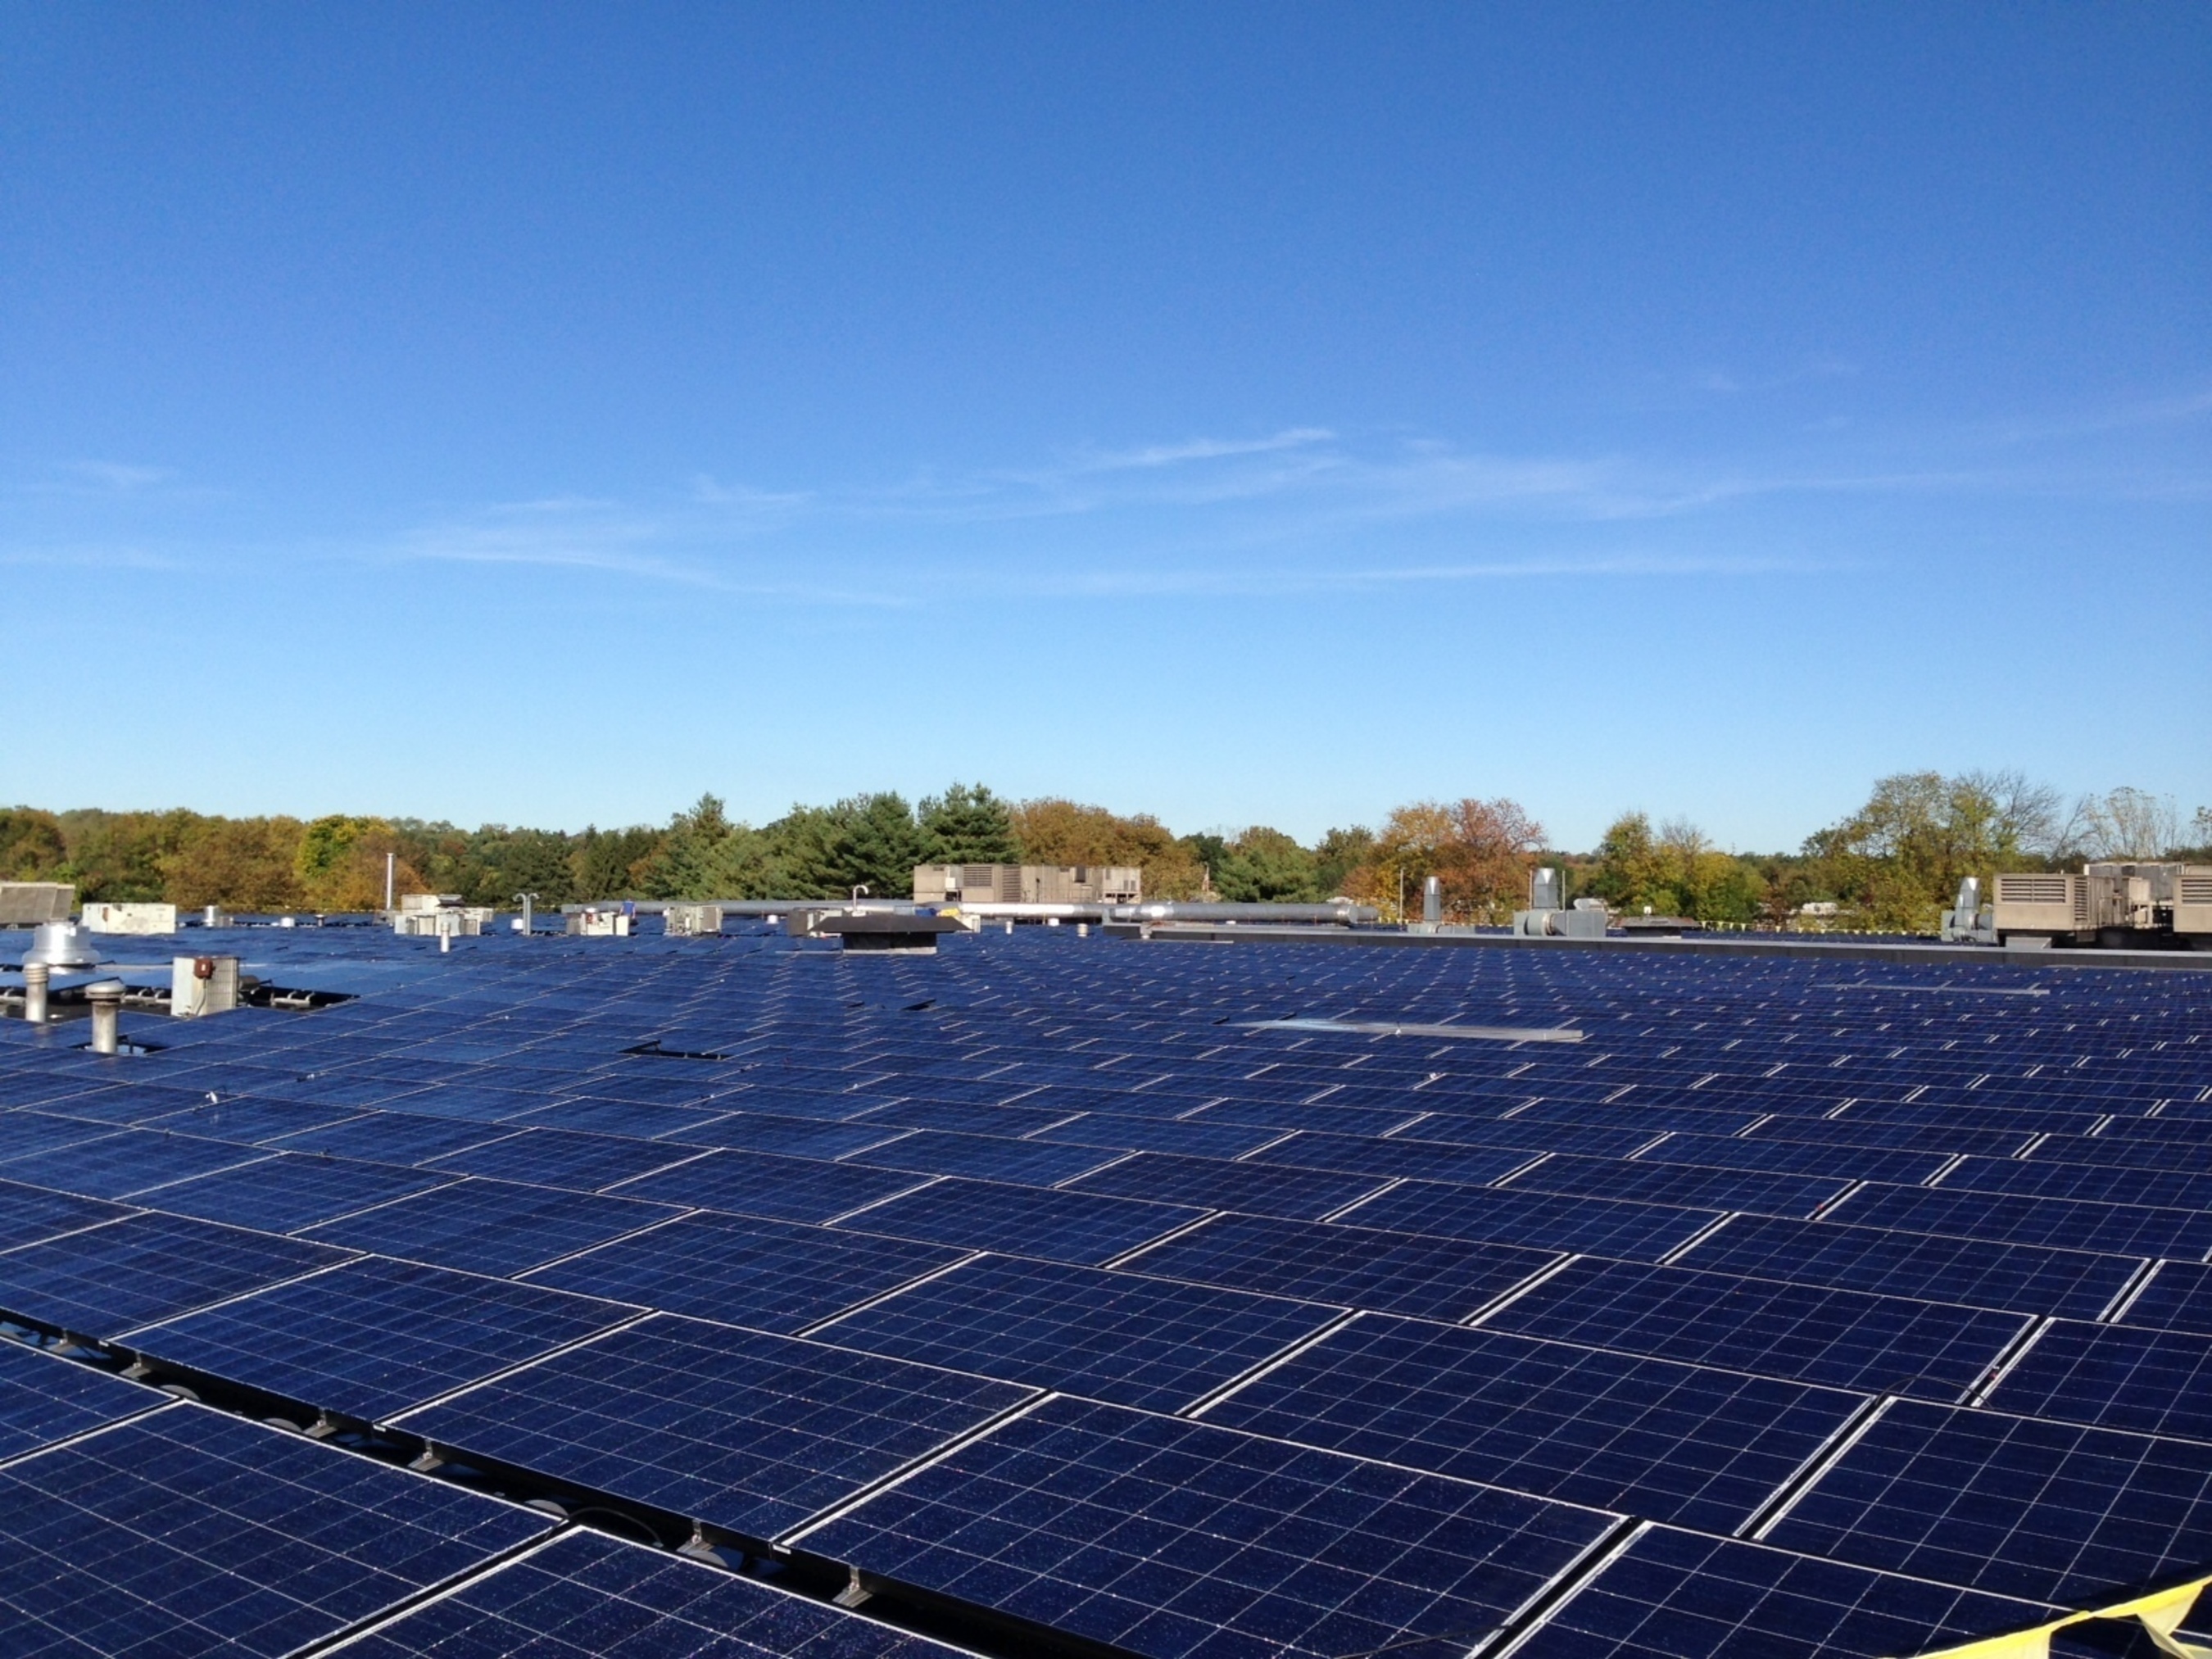 Nice-Pak and PDI Complete Installation of 855kw Solar Array on Rooftop of Orangeburg NY Headquarters and Plant. This solar system is the largest rooftop array in Rockland County and one of the largest of its kind in New York. The companies' installed the array as part of their shared commitment to invest in and support sustainable business practices. NYSERDA provided funding under Gov. Cuomo's NY-Sun Initiative (PRNewsFoto/Nice-Pak)